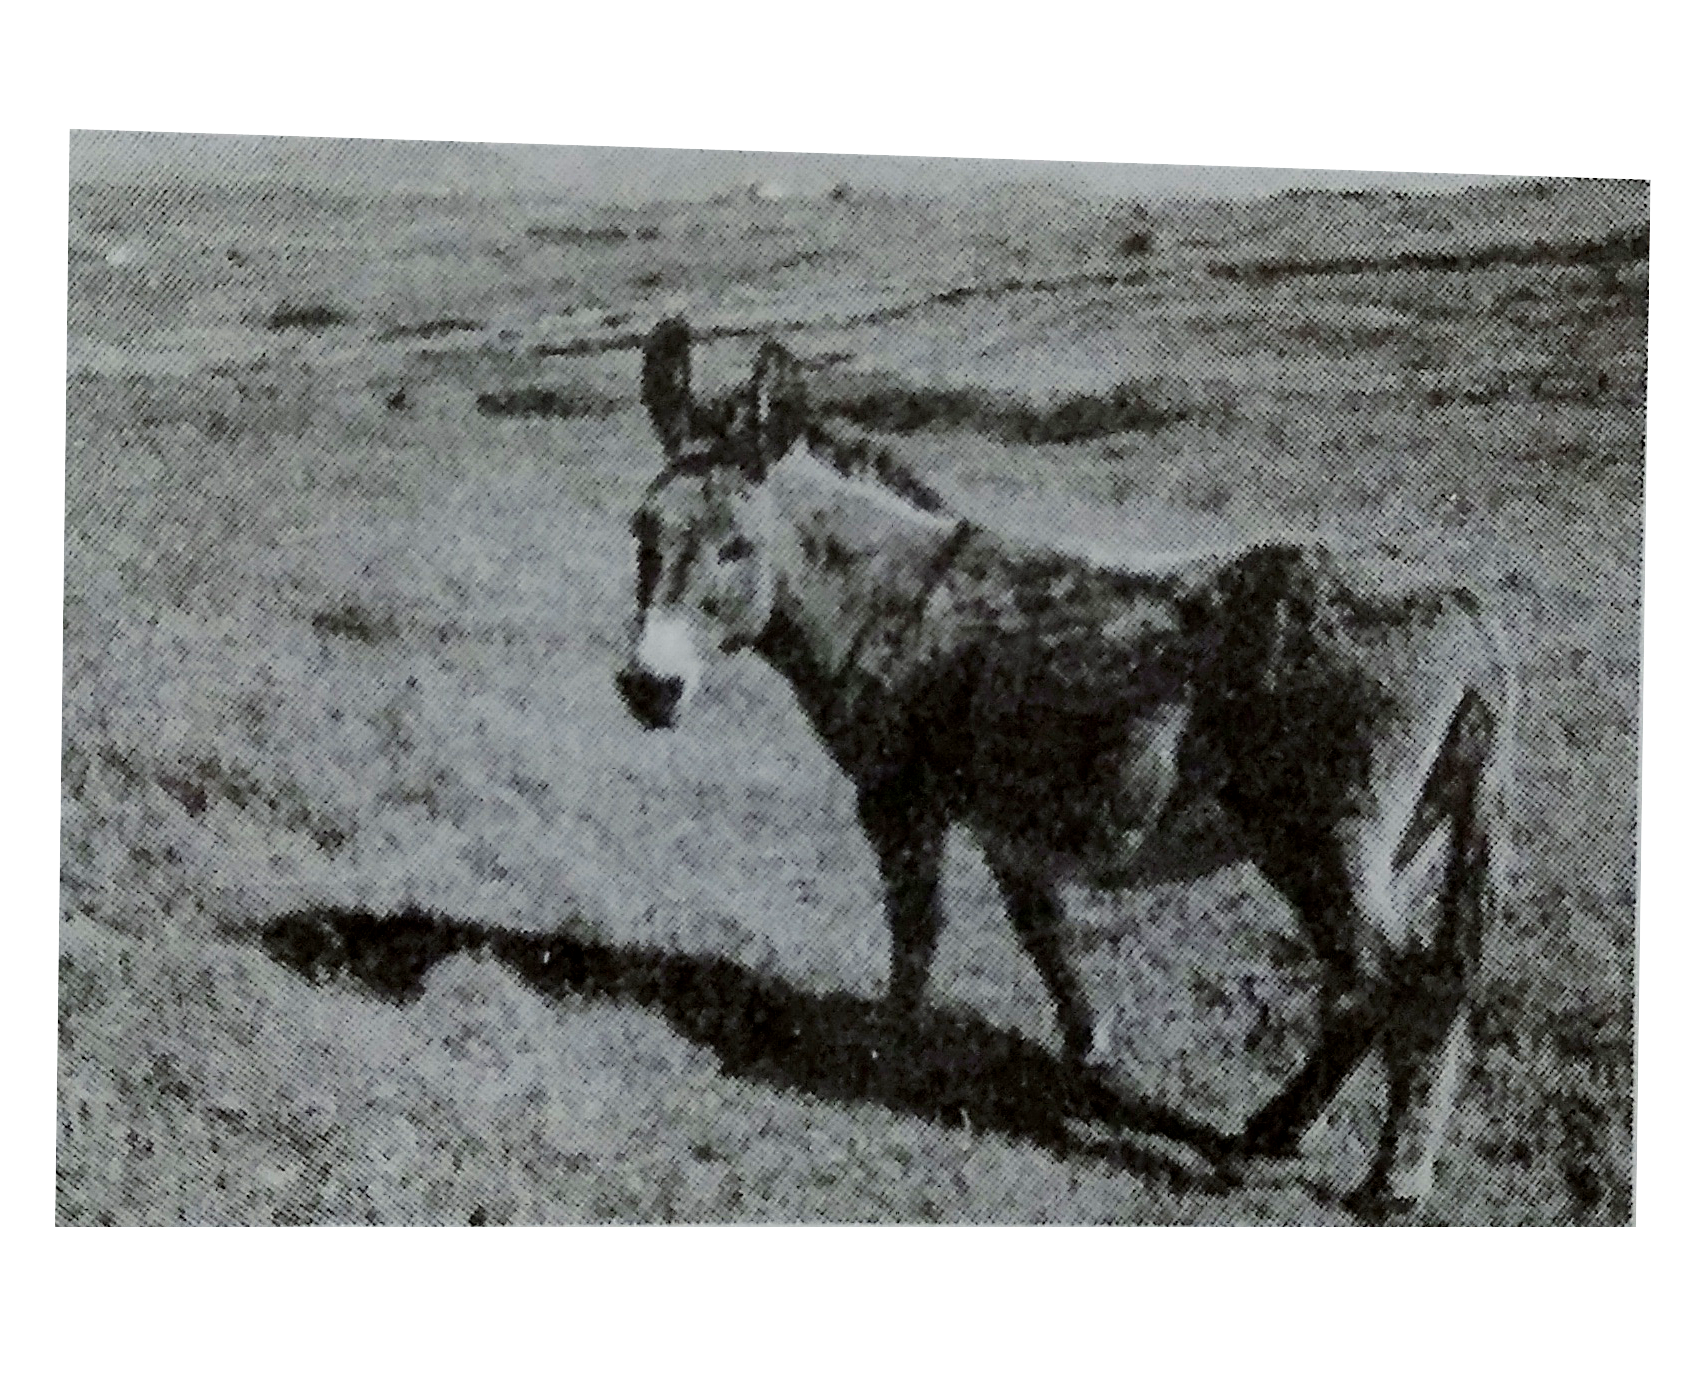 A mule is produced by the interspecific hybridisation between